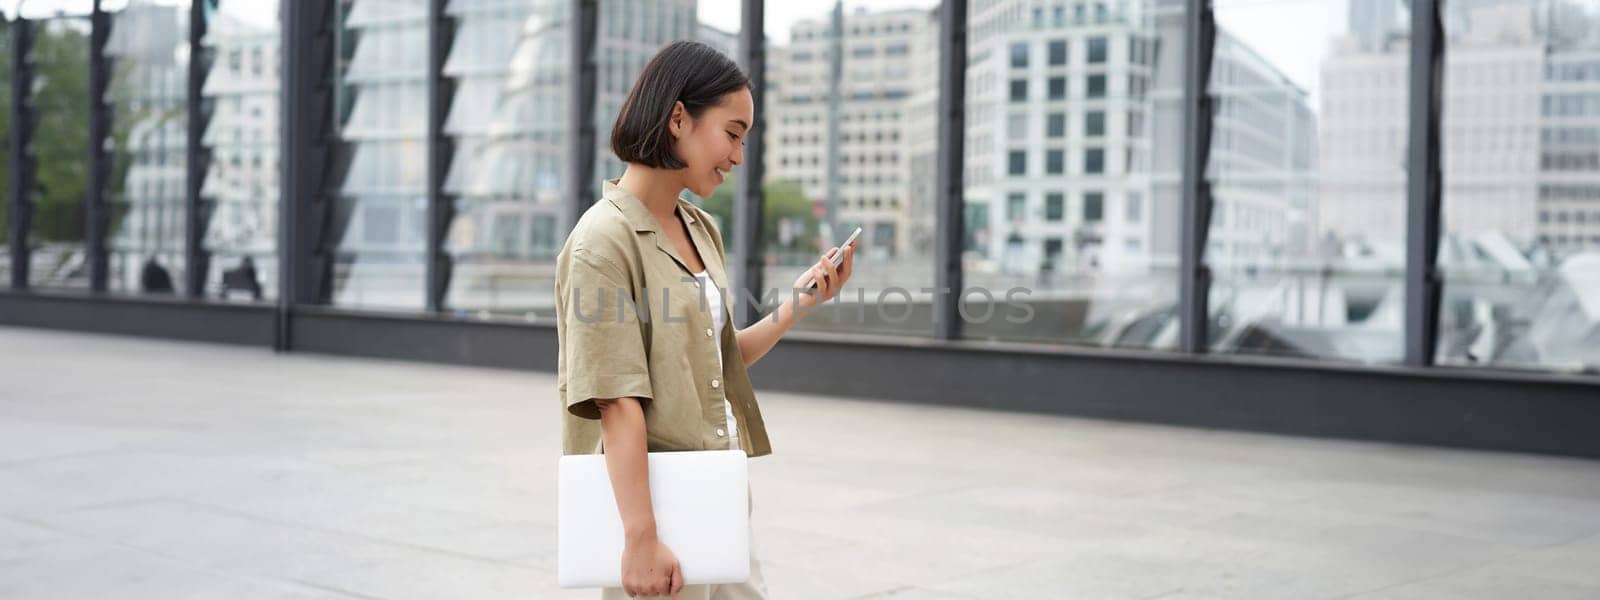 Young asian woman with laptop, walking on street and texting message, smiling while looking at smartphone.